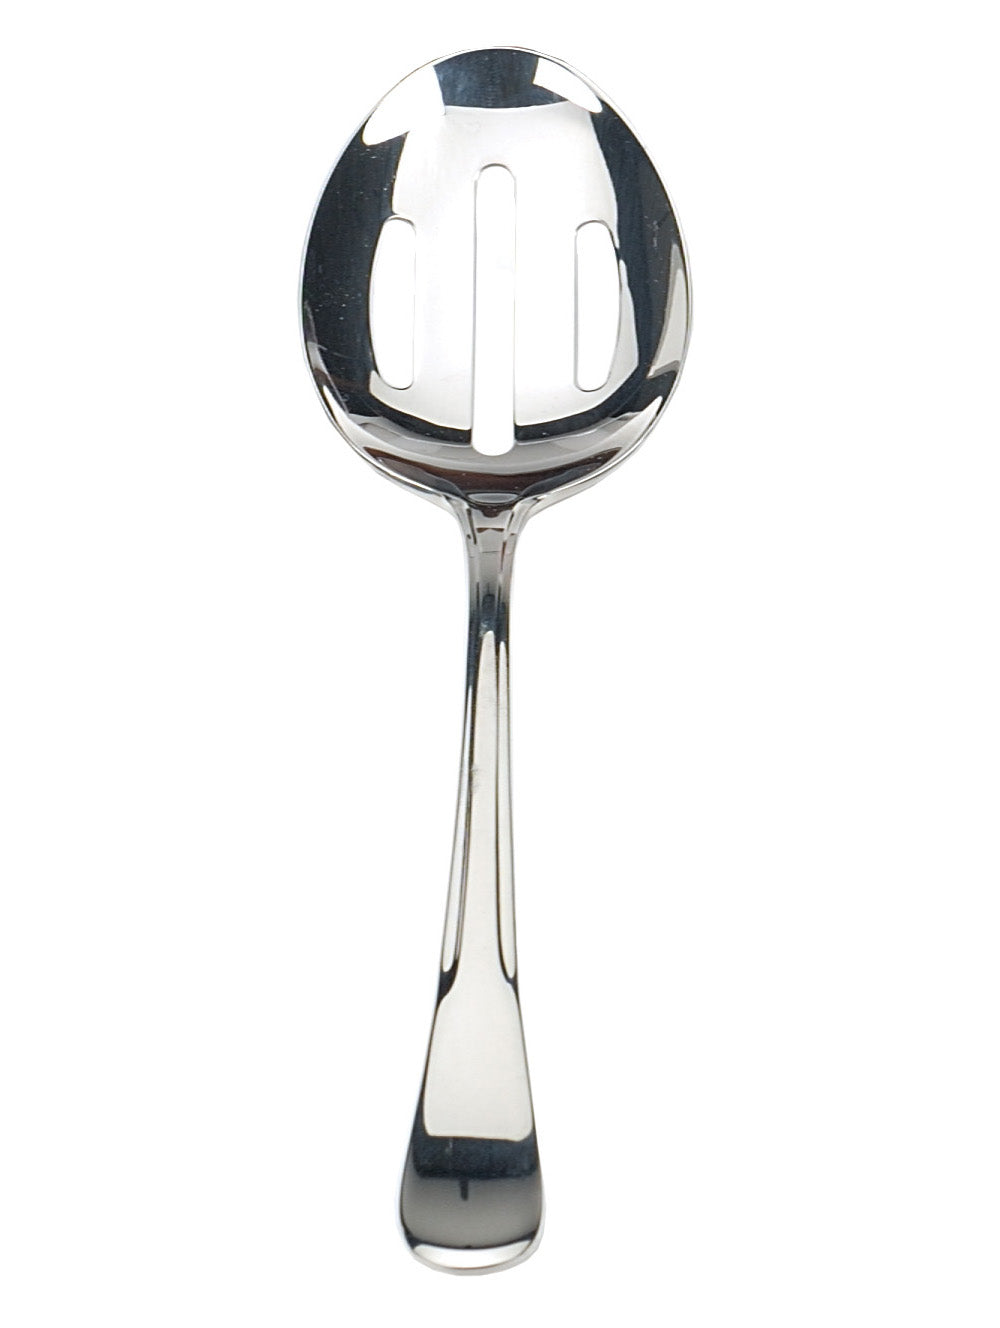 View RSVP - Endurance® Slotted Serving Spoon